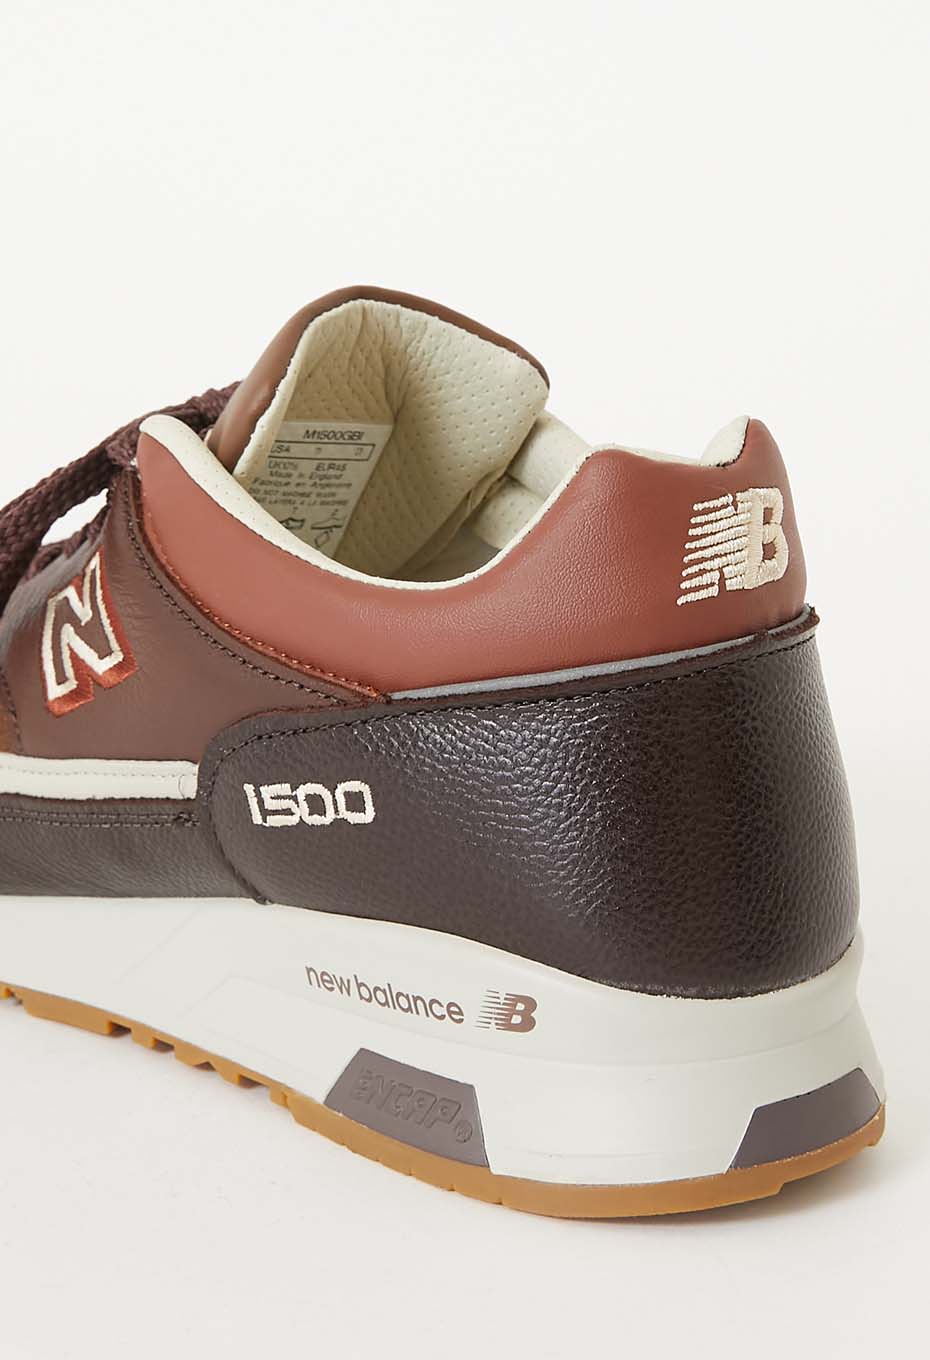 NEW BALANCE|Sneakers|NEW BALANCE M1500 Shoes MADE IN UK